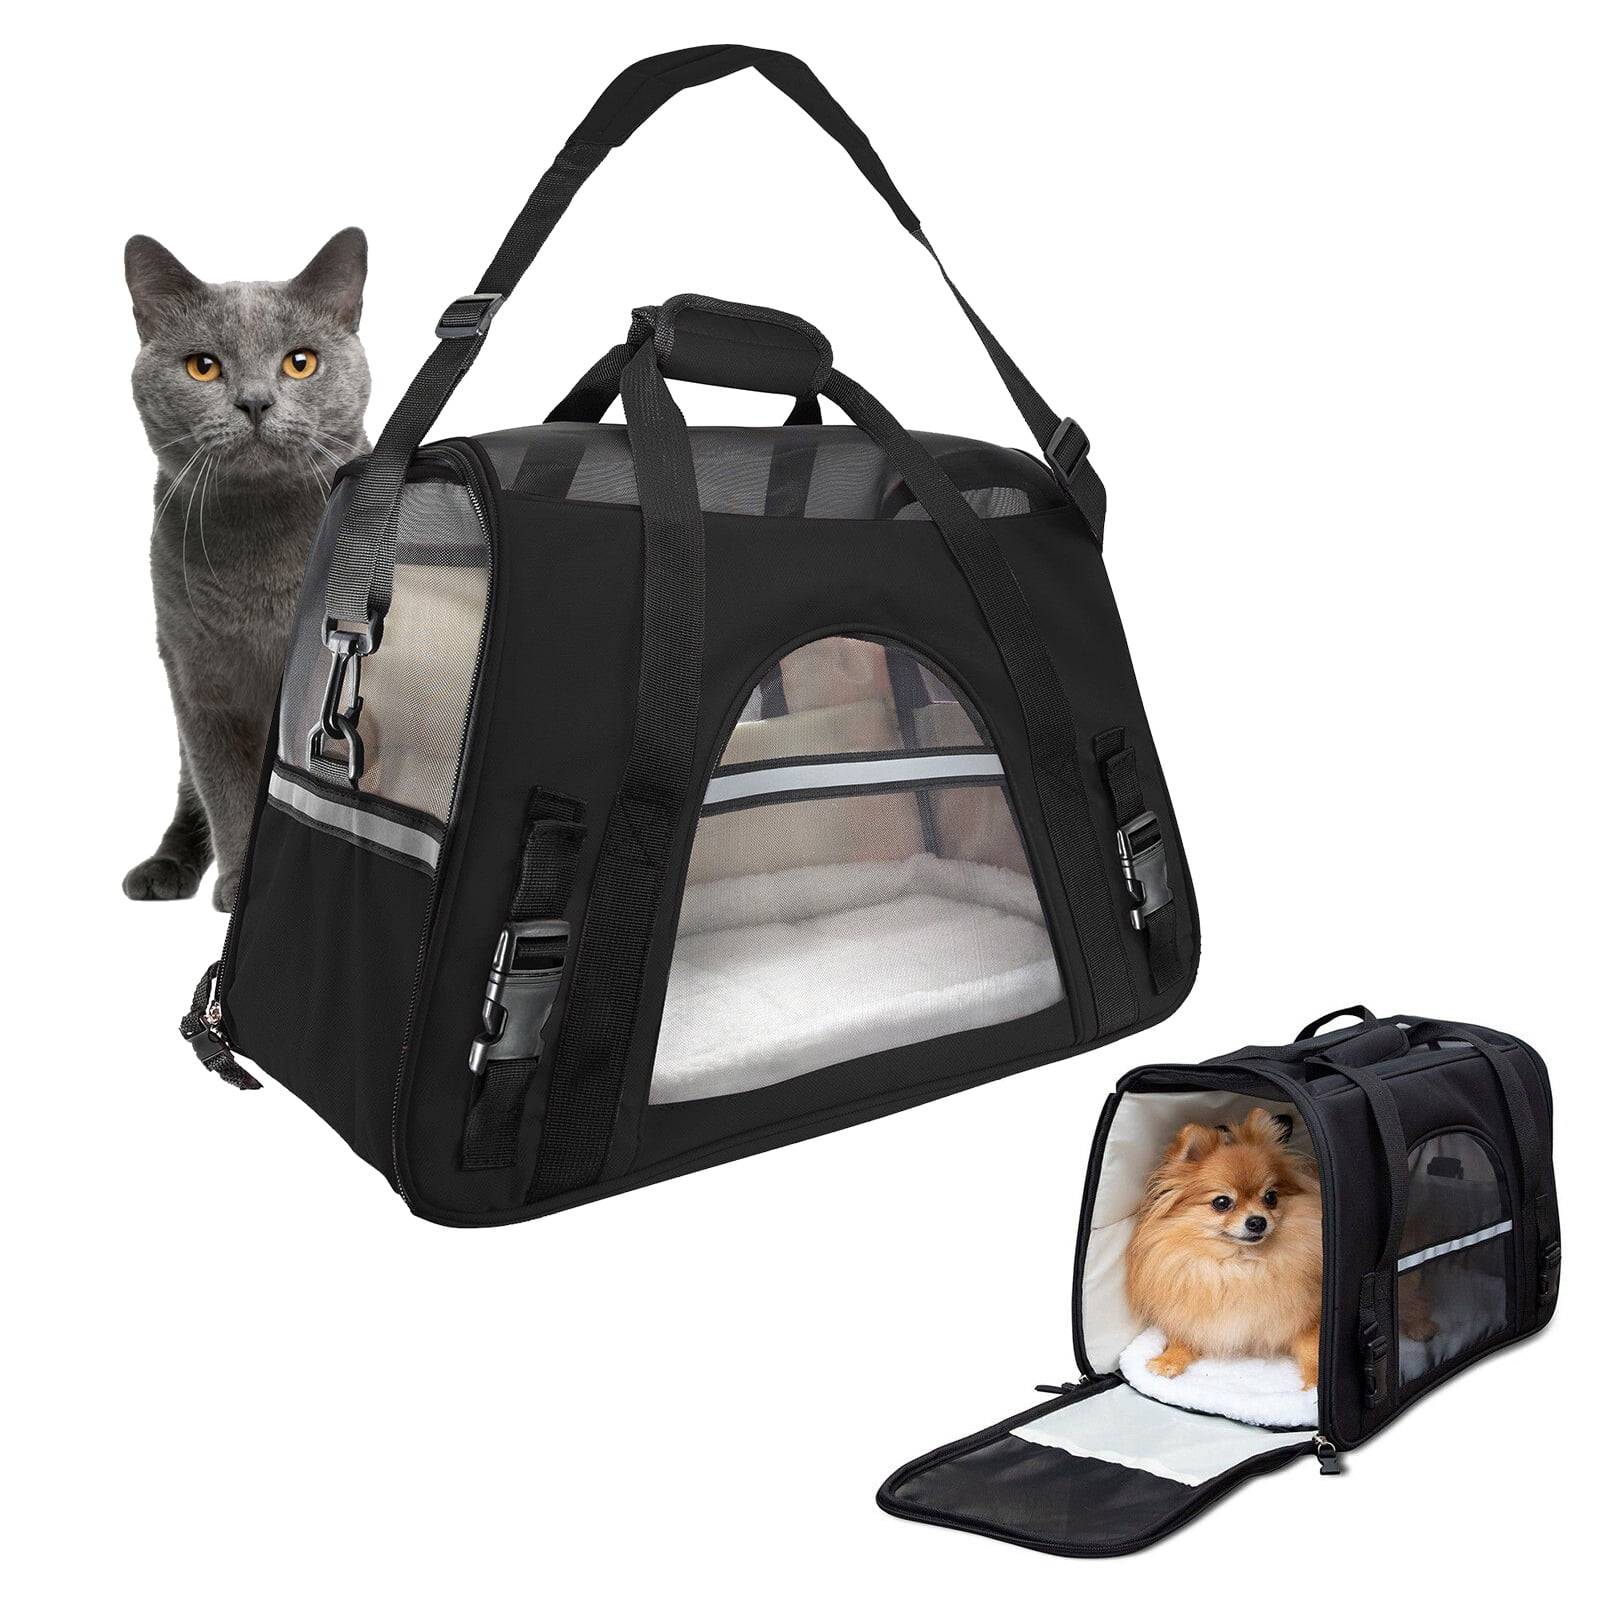 Pet Carrier for Small Dogs and Cats with a Soft Travel Bed Inside the Bag Safety on Car Can Be Used As a Purse Beautiful Design with the Best Lifetime Guarantee Made with High Quality Materials for Your Puppy Airline Approved 